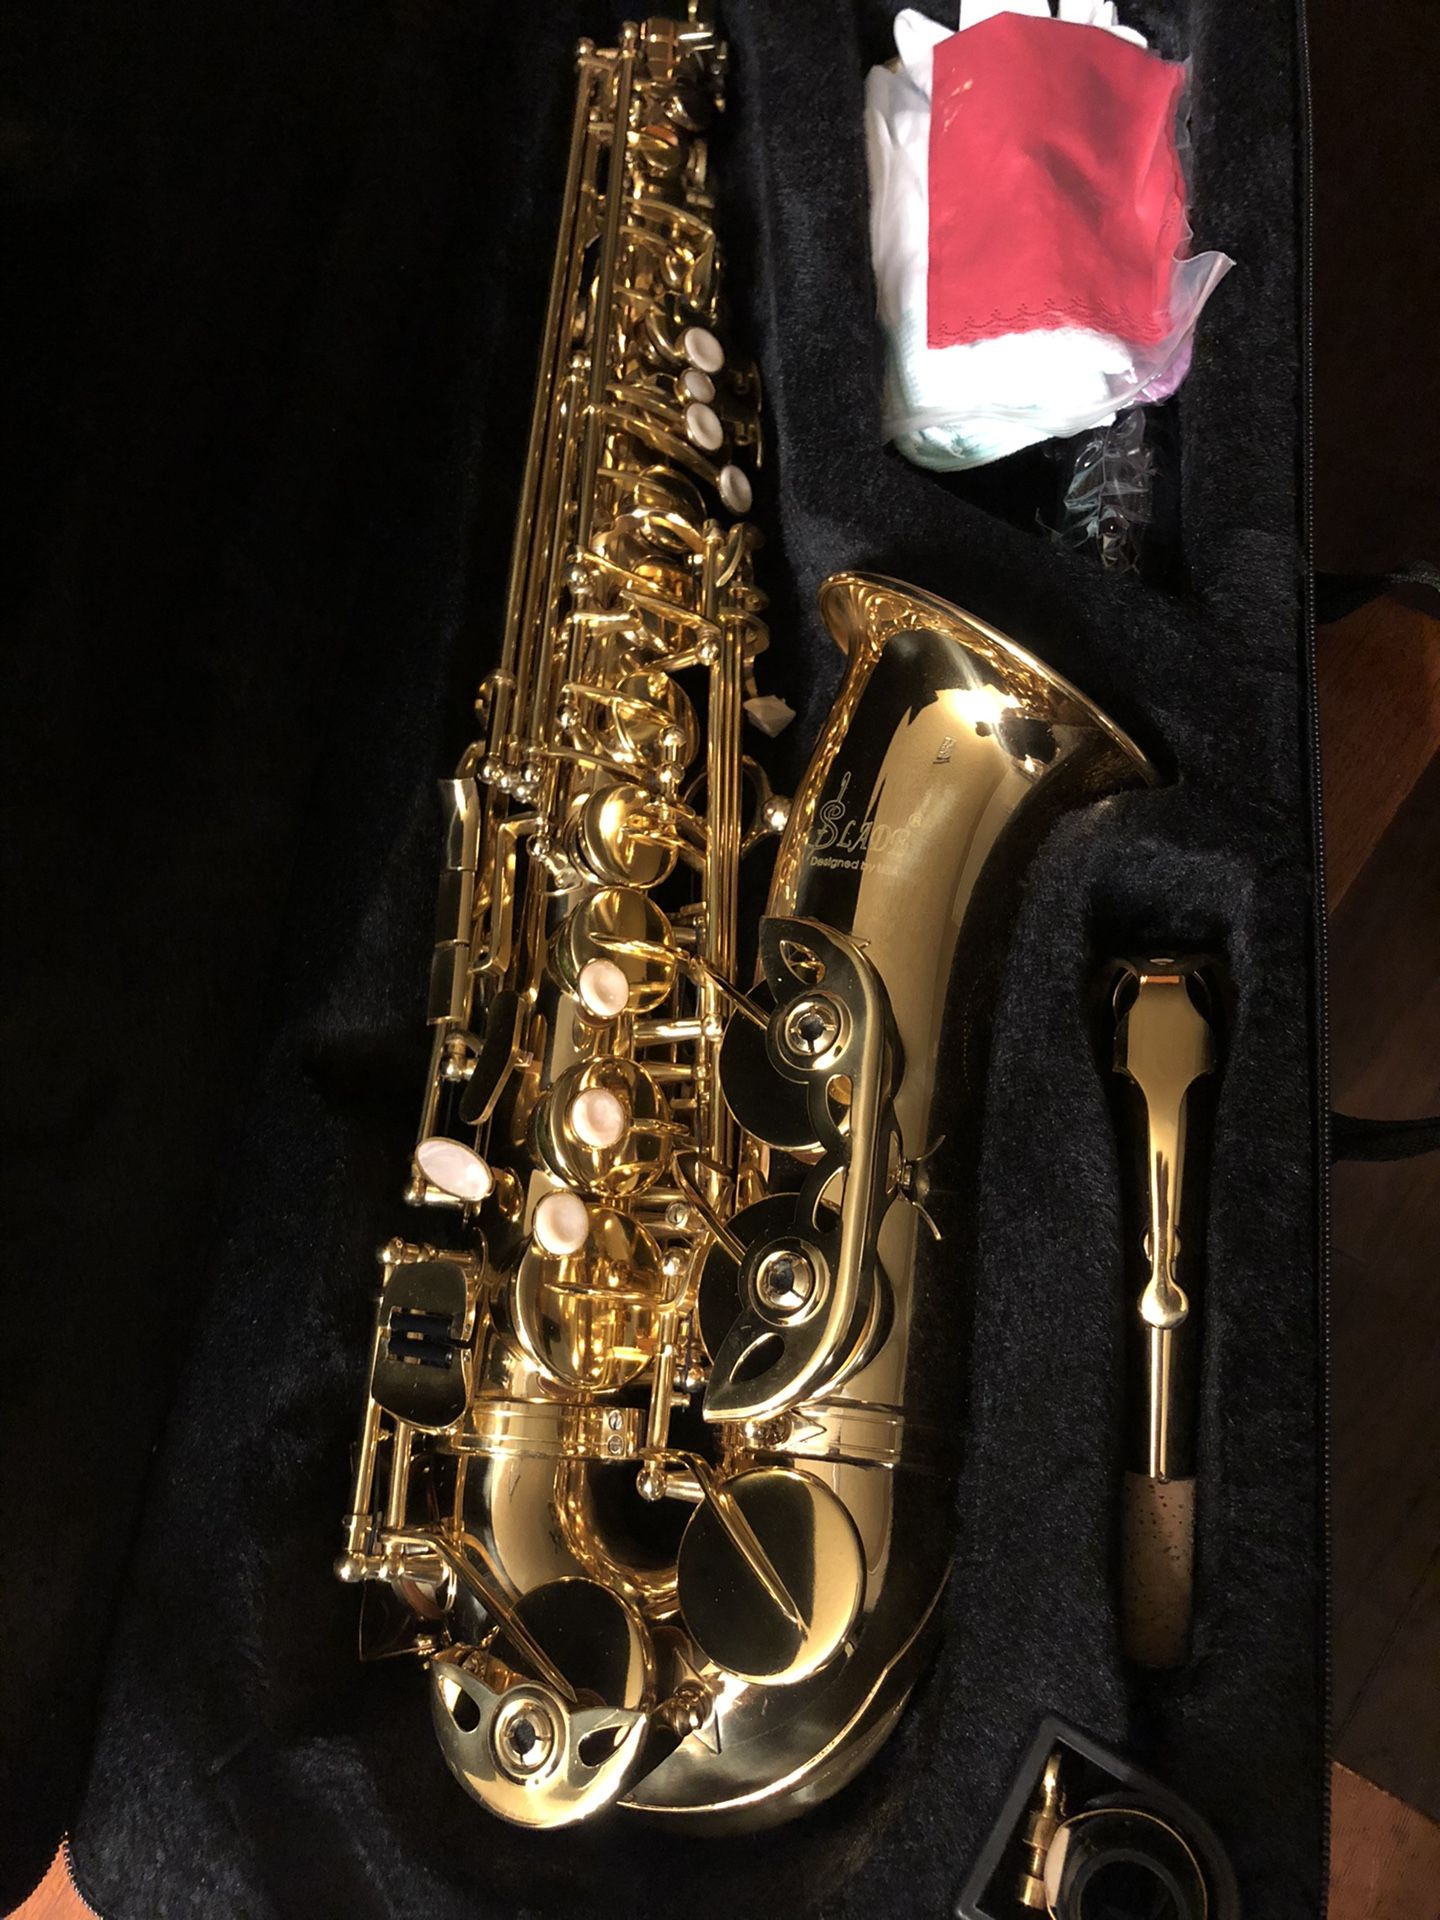 Like New Gold Alto Saxophone Excellent Condition $250 Firm